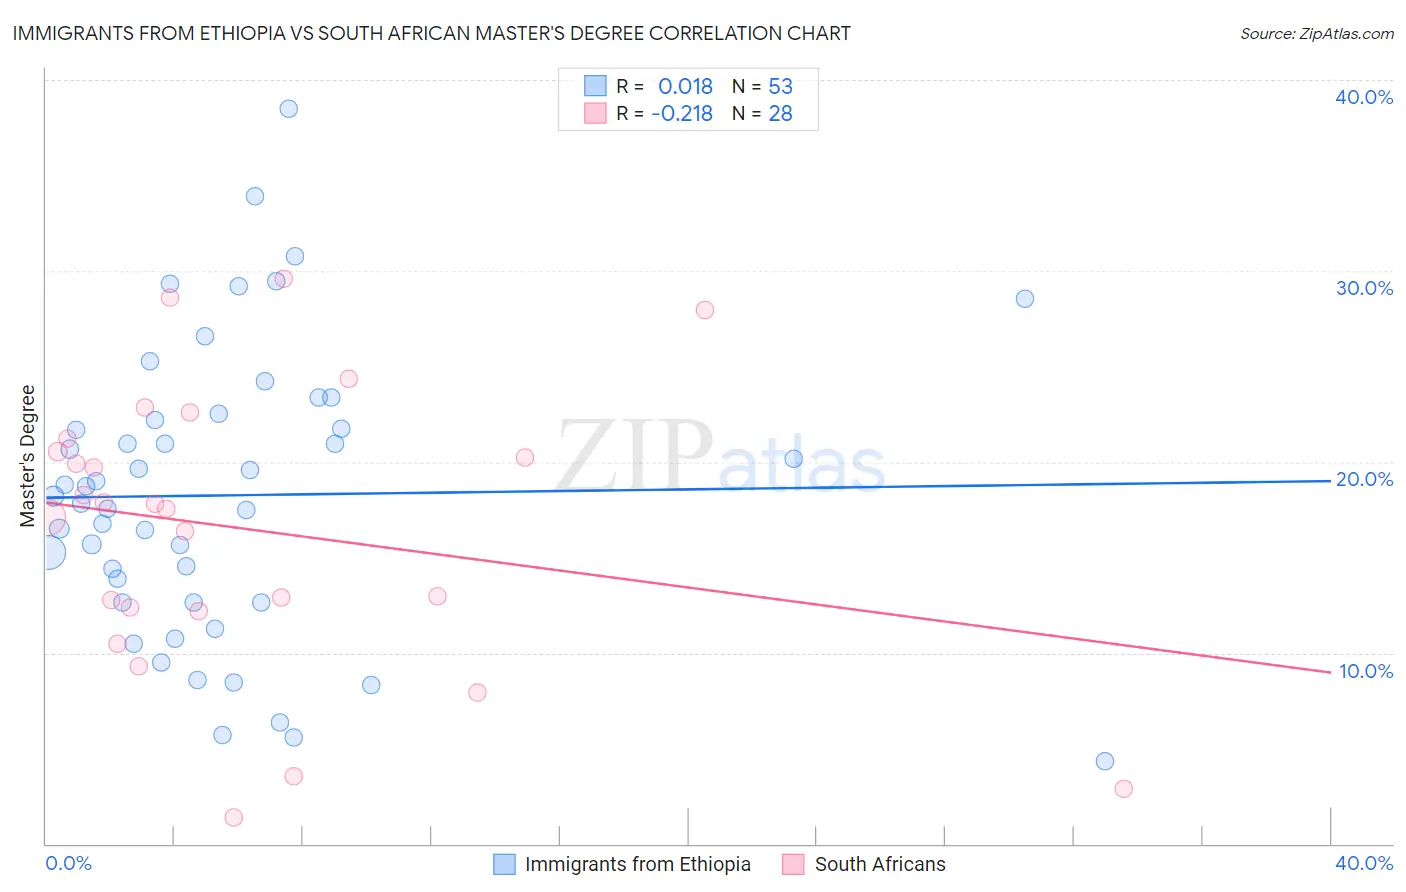 Immigrants from Ethiopia vs South African Master's Degree